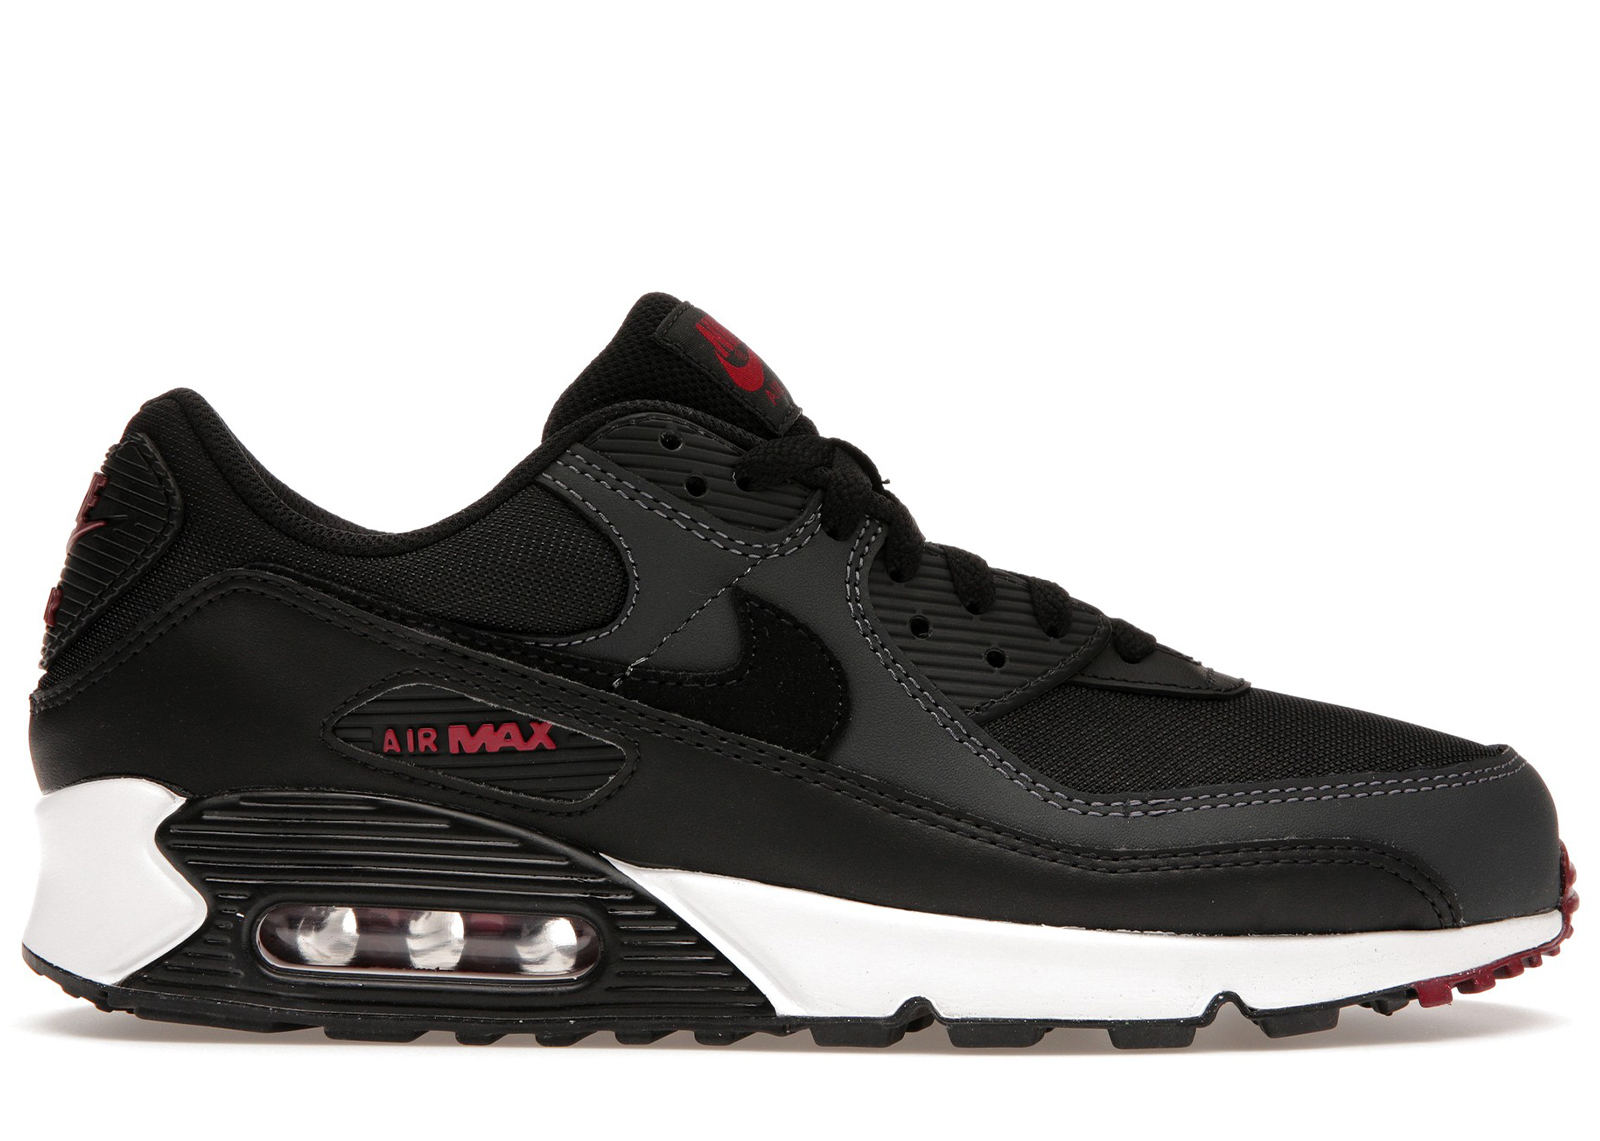 Nike Air Max 90 Anthracite Team Red Men's - DQ4071-001 - US